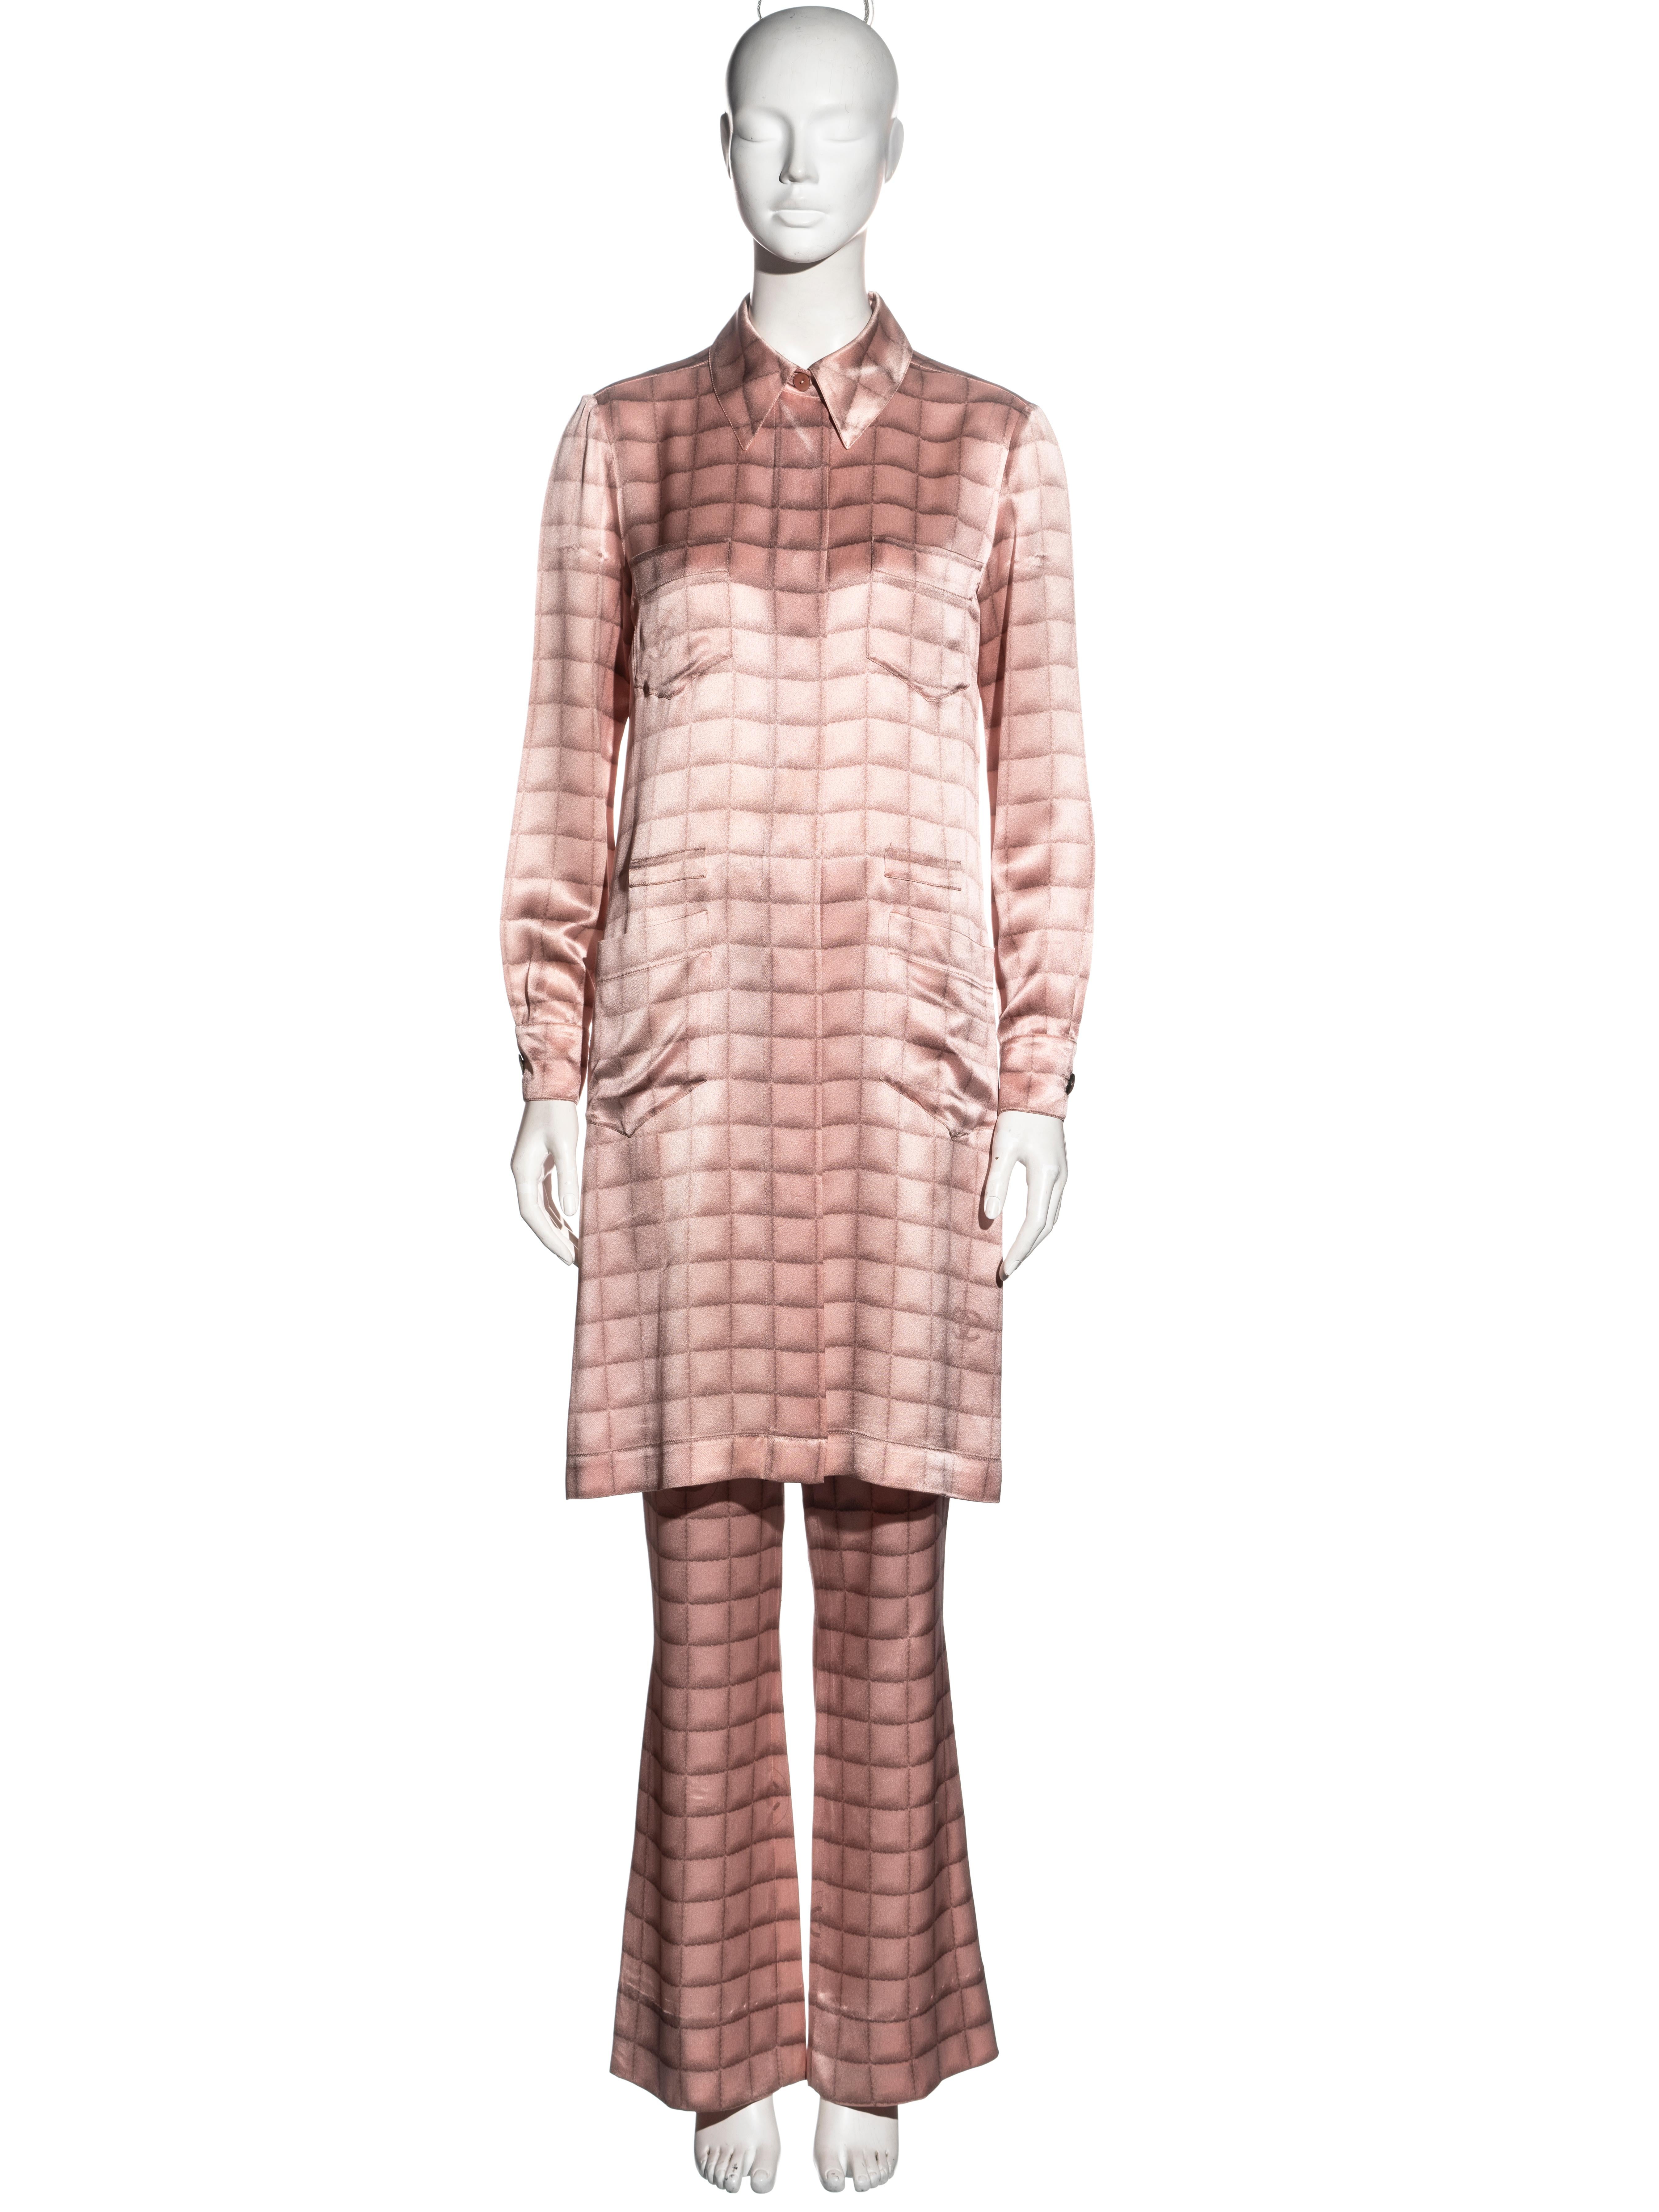 ▪ Chanel pant suit 
▪ Designed by Karl Lagerfeld
▪ Pink silk with squared quilted print 
▪ Shirt dress with four front pockets
▪ Flared-leg pants 
▪ Mother of Pearl buttons 
▪ Shirt: FR 38 - UK 10 - US 6 
▪ Pants: FR 40 - UK 12 - US 8
▪ Fall-Winter